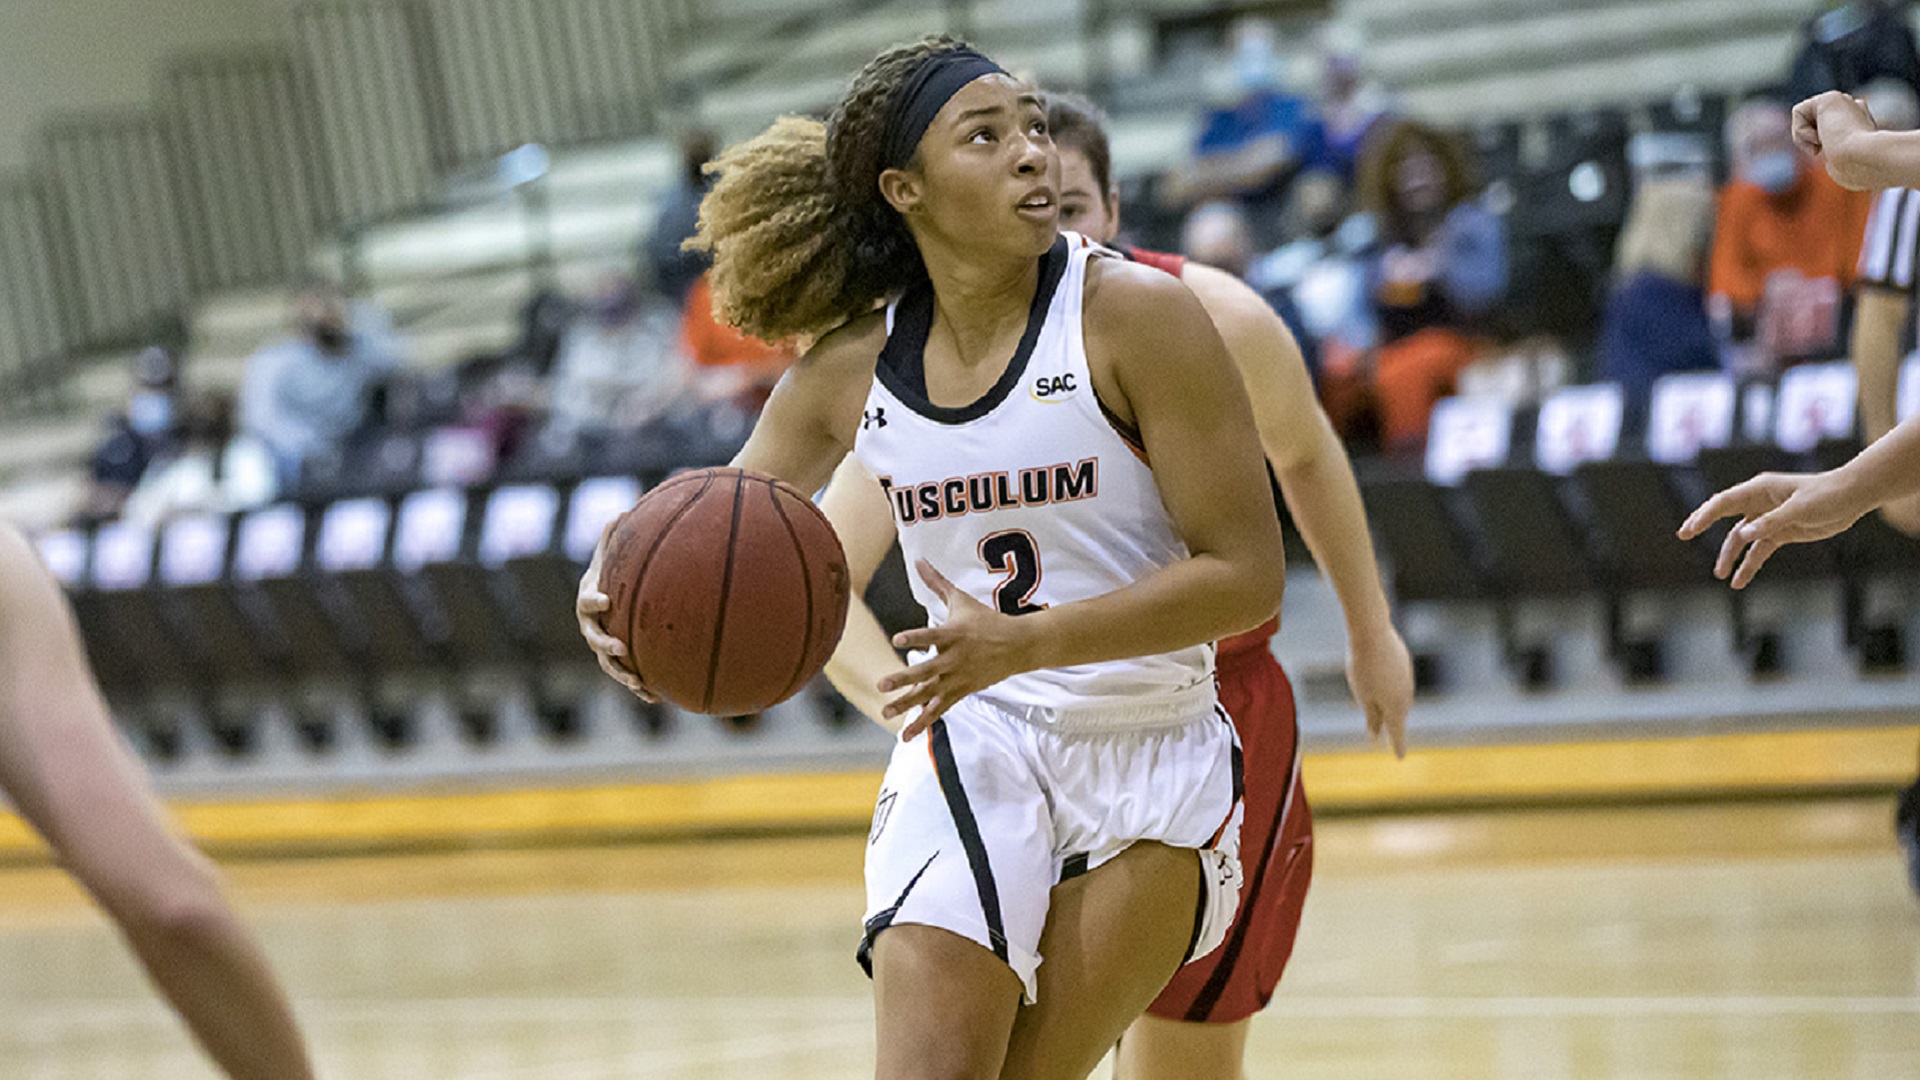 Jalia Arnwine scored 16 first-half points and finished with 18 against UVA Wise (photo by Chuck Williams)